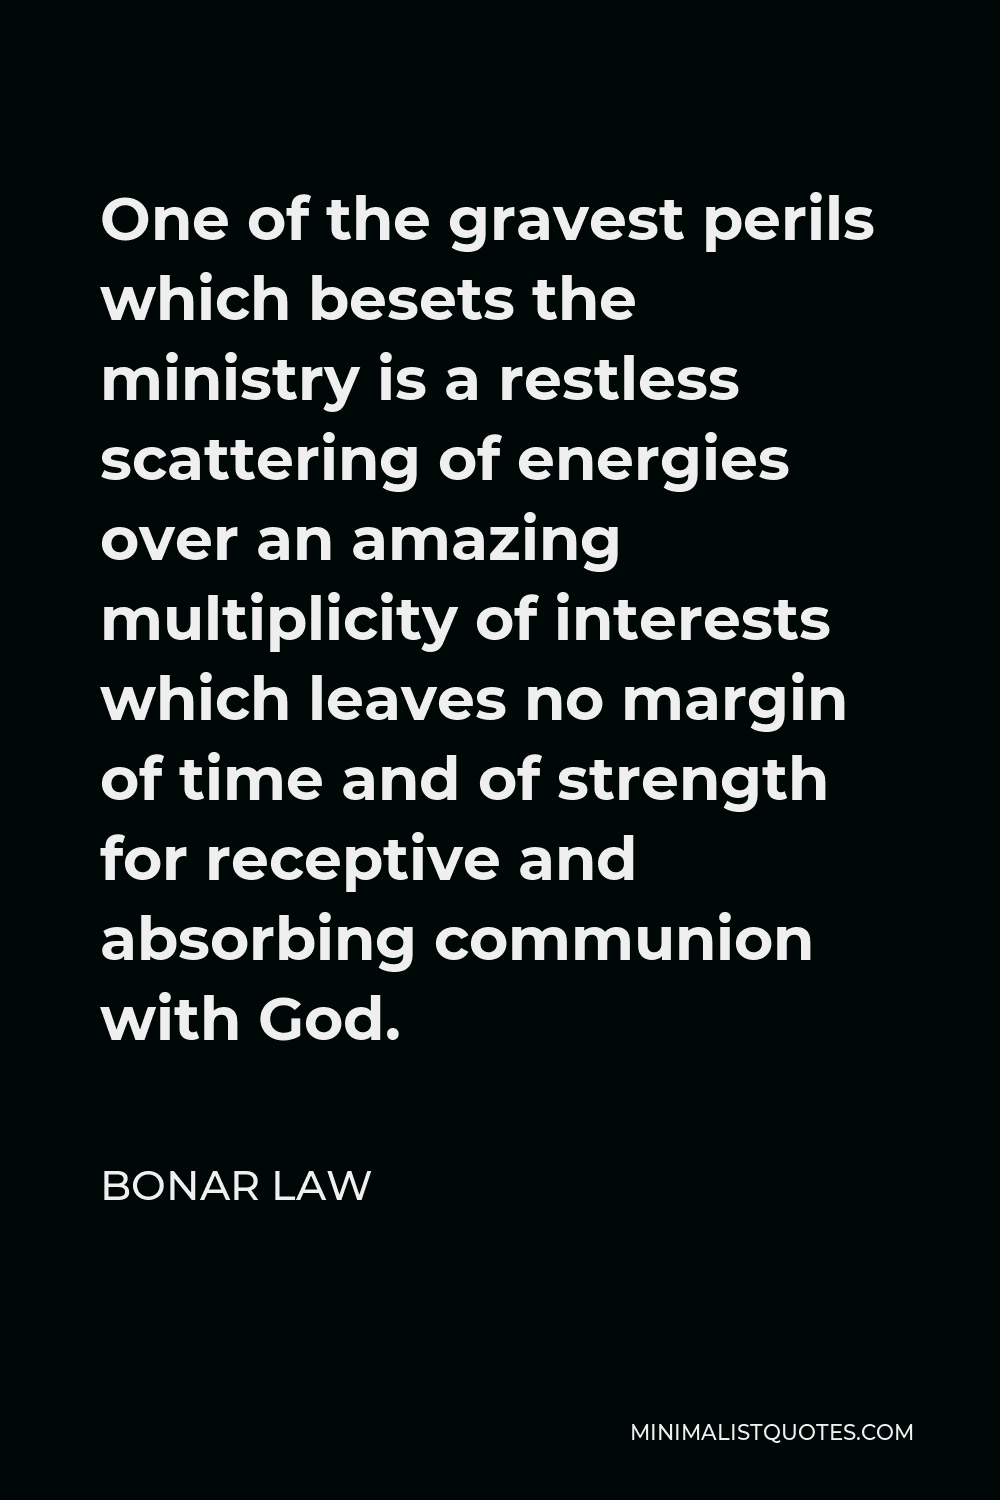 Bonar Law Quote - One of the gravest perils which besets the ministry is a restless scattering of energies over an amazing multiplicity of interests which leaves no margin of time and of strength for receptive and absorbing communion with God.